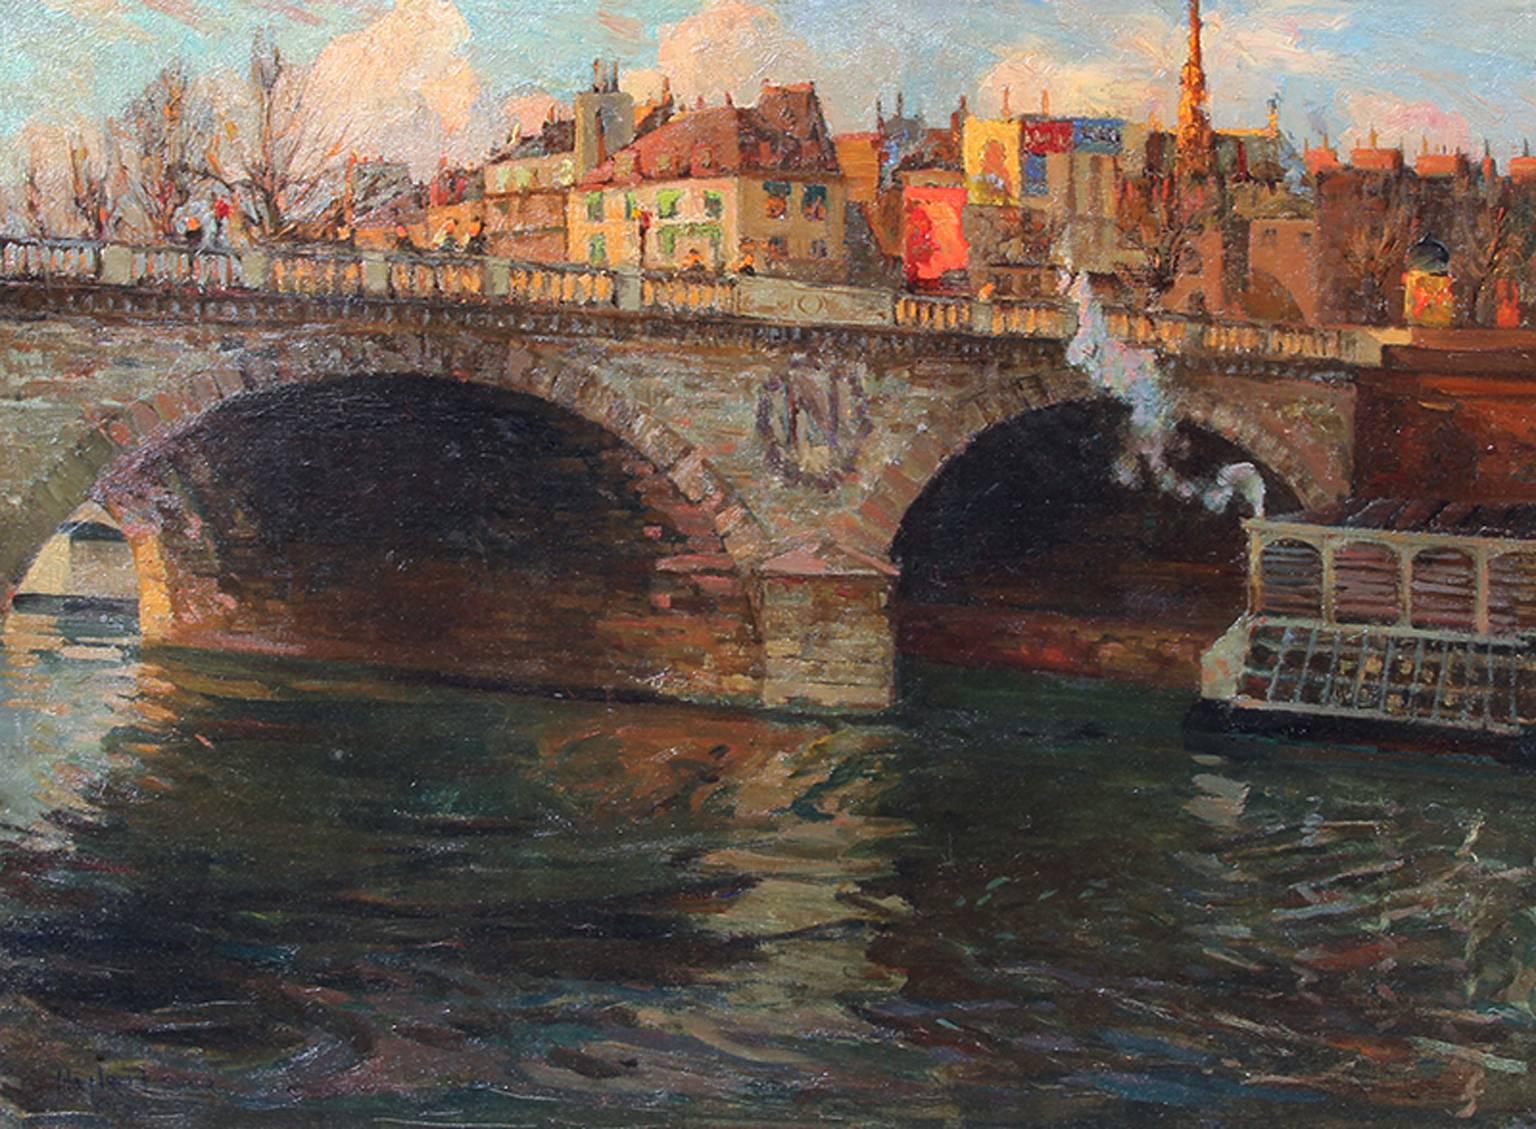 RICHARD HAYLEY LEVER
American, 1876–1958

Pont Saint-Michel, Paris

Signed and dated HAYLEY LEVER/ PARIS '04
Oil on canvas
24 x 32 inches (61 x 81.3 cm)
Framed: 33 x 40 inches (84 x 101.5 cm)
 
Exhibited
New York, Spanierman Gallery, Hayley Lever